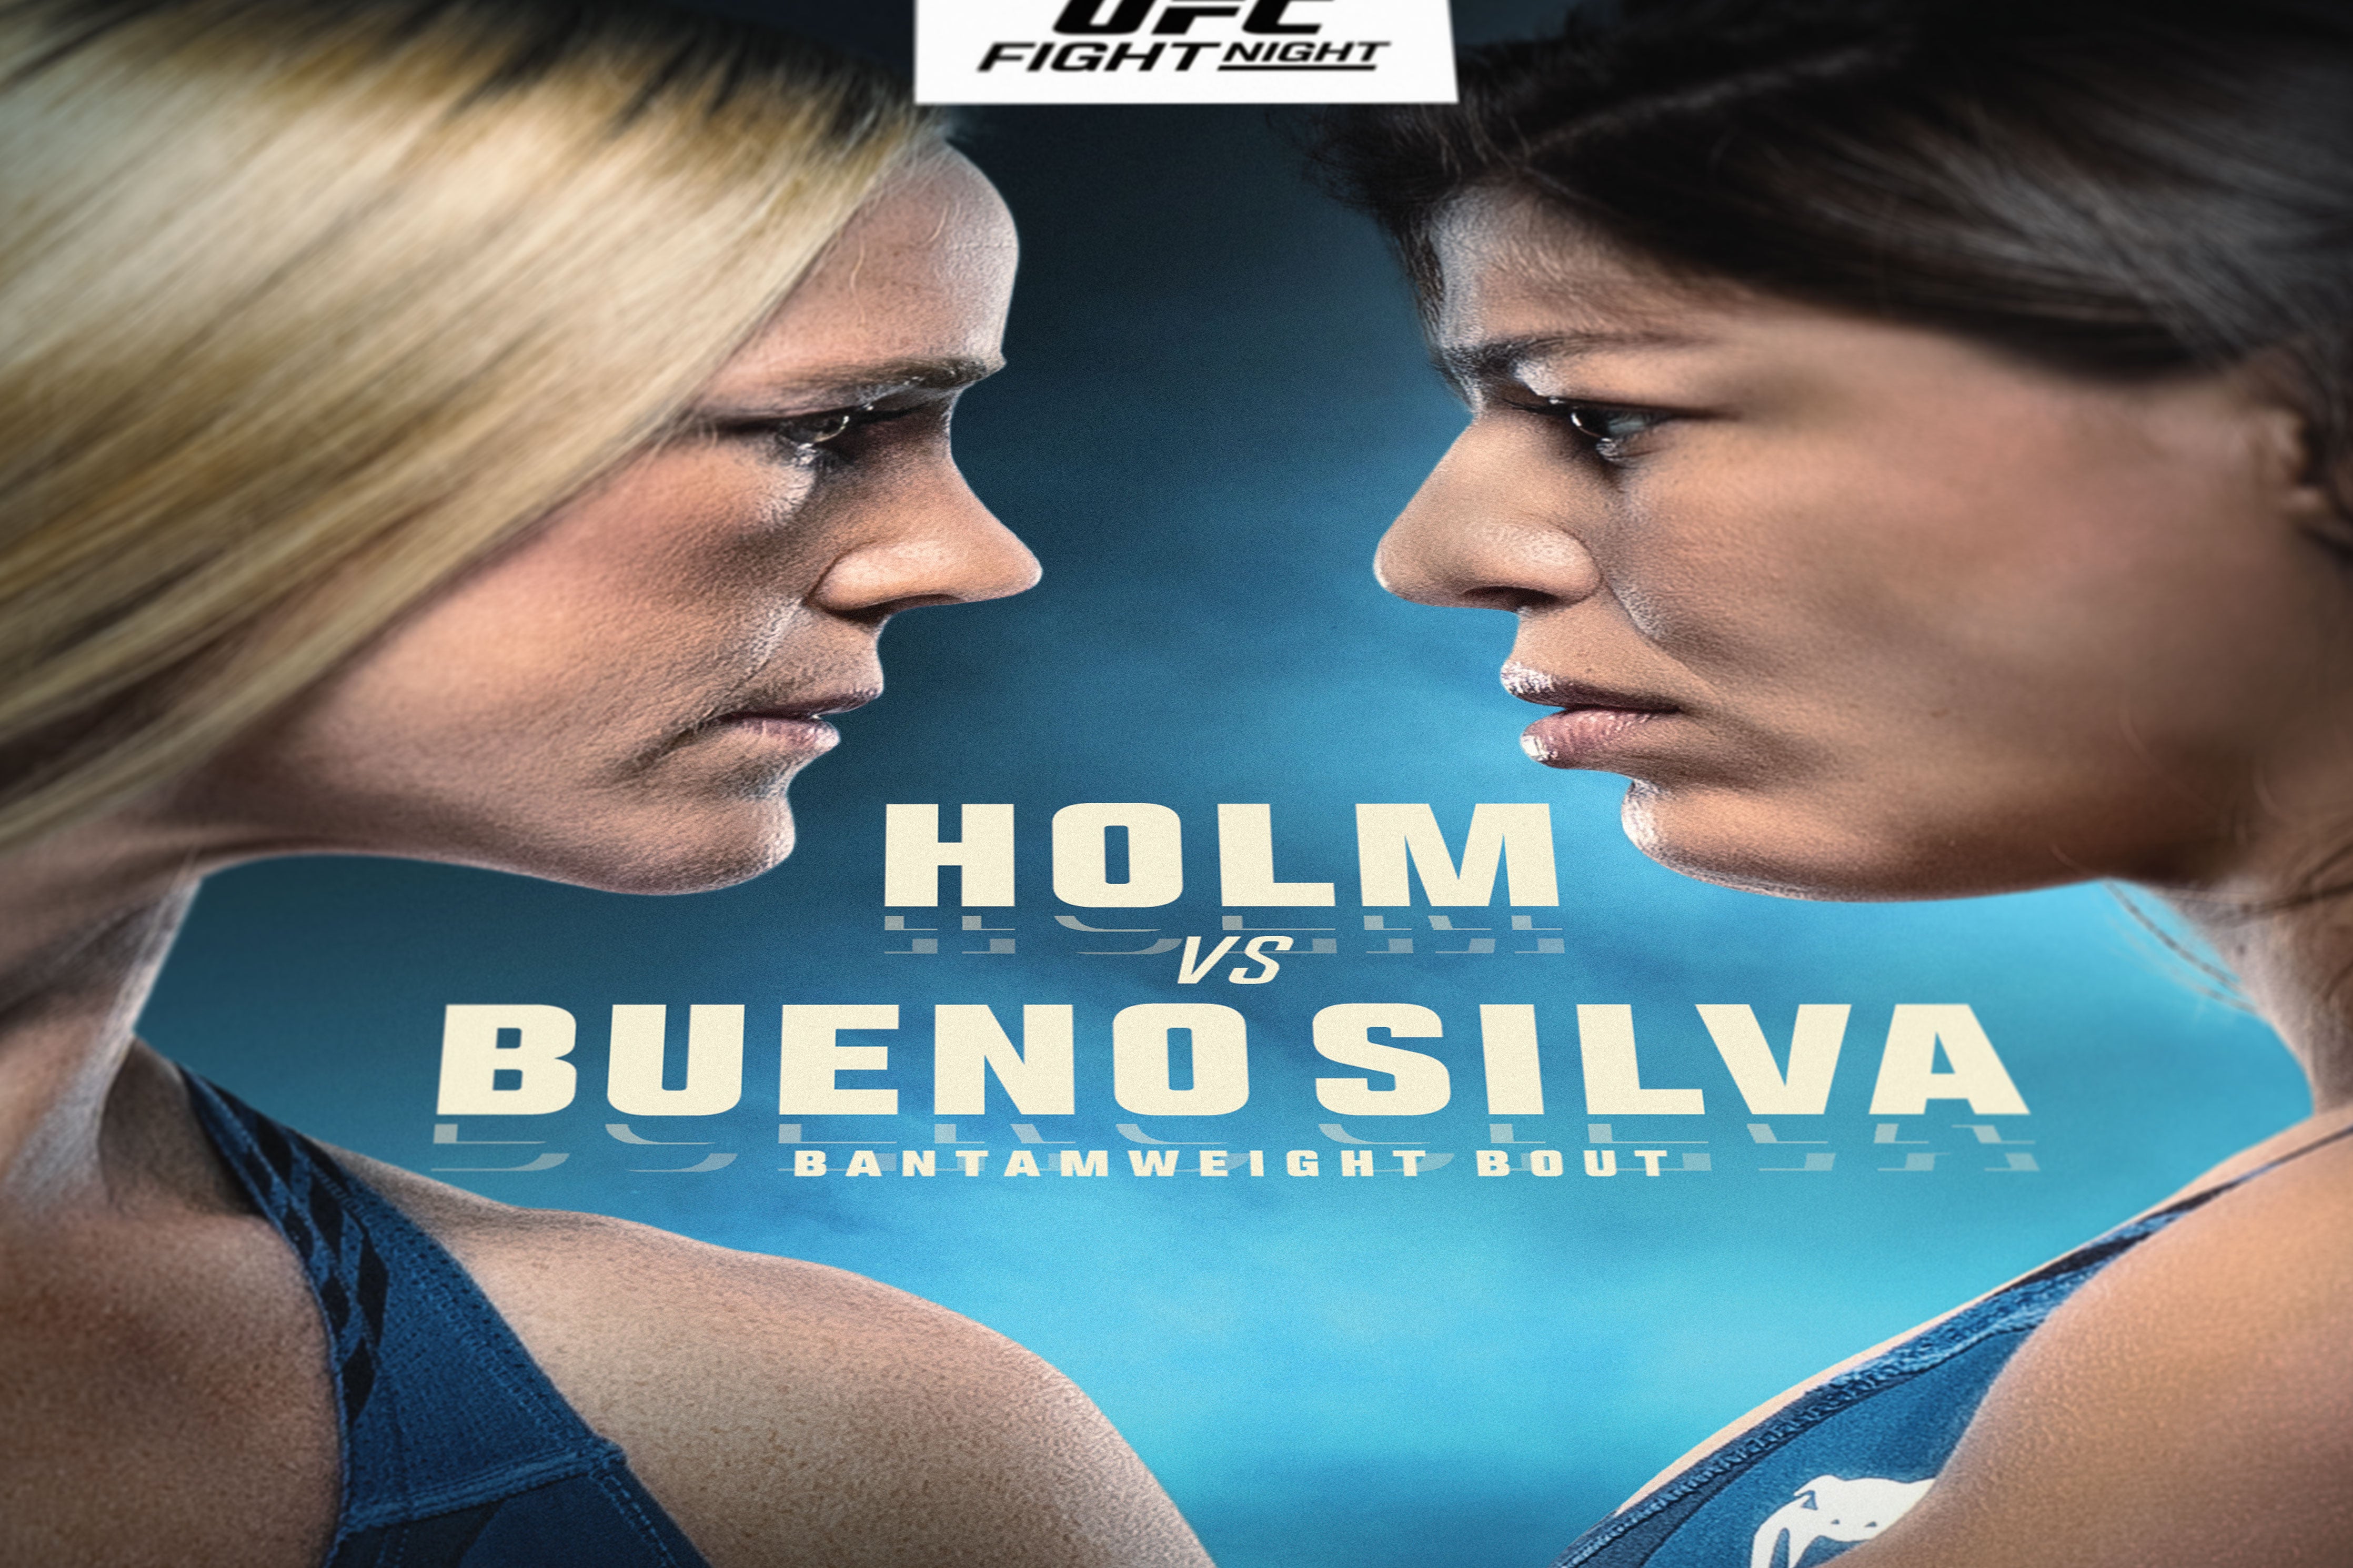 UFC Fight Night: Holm vs Bueno Silva Autographed Event Poster